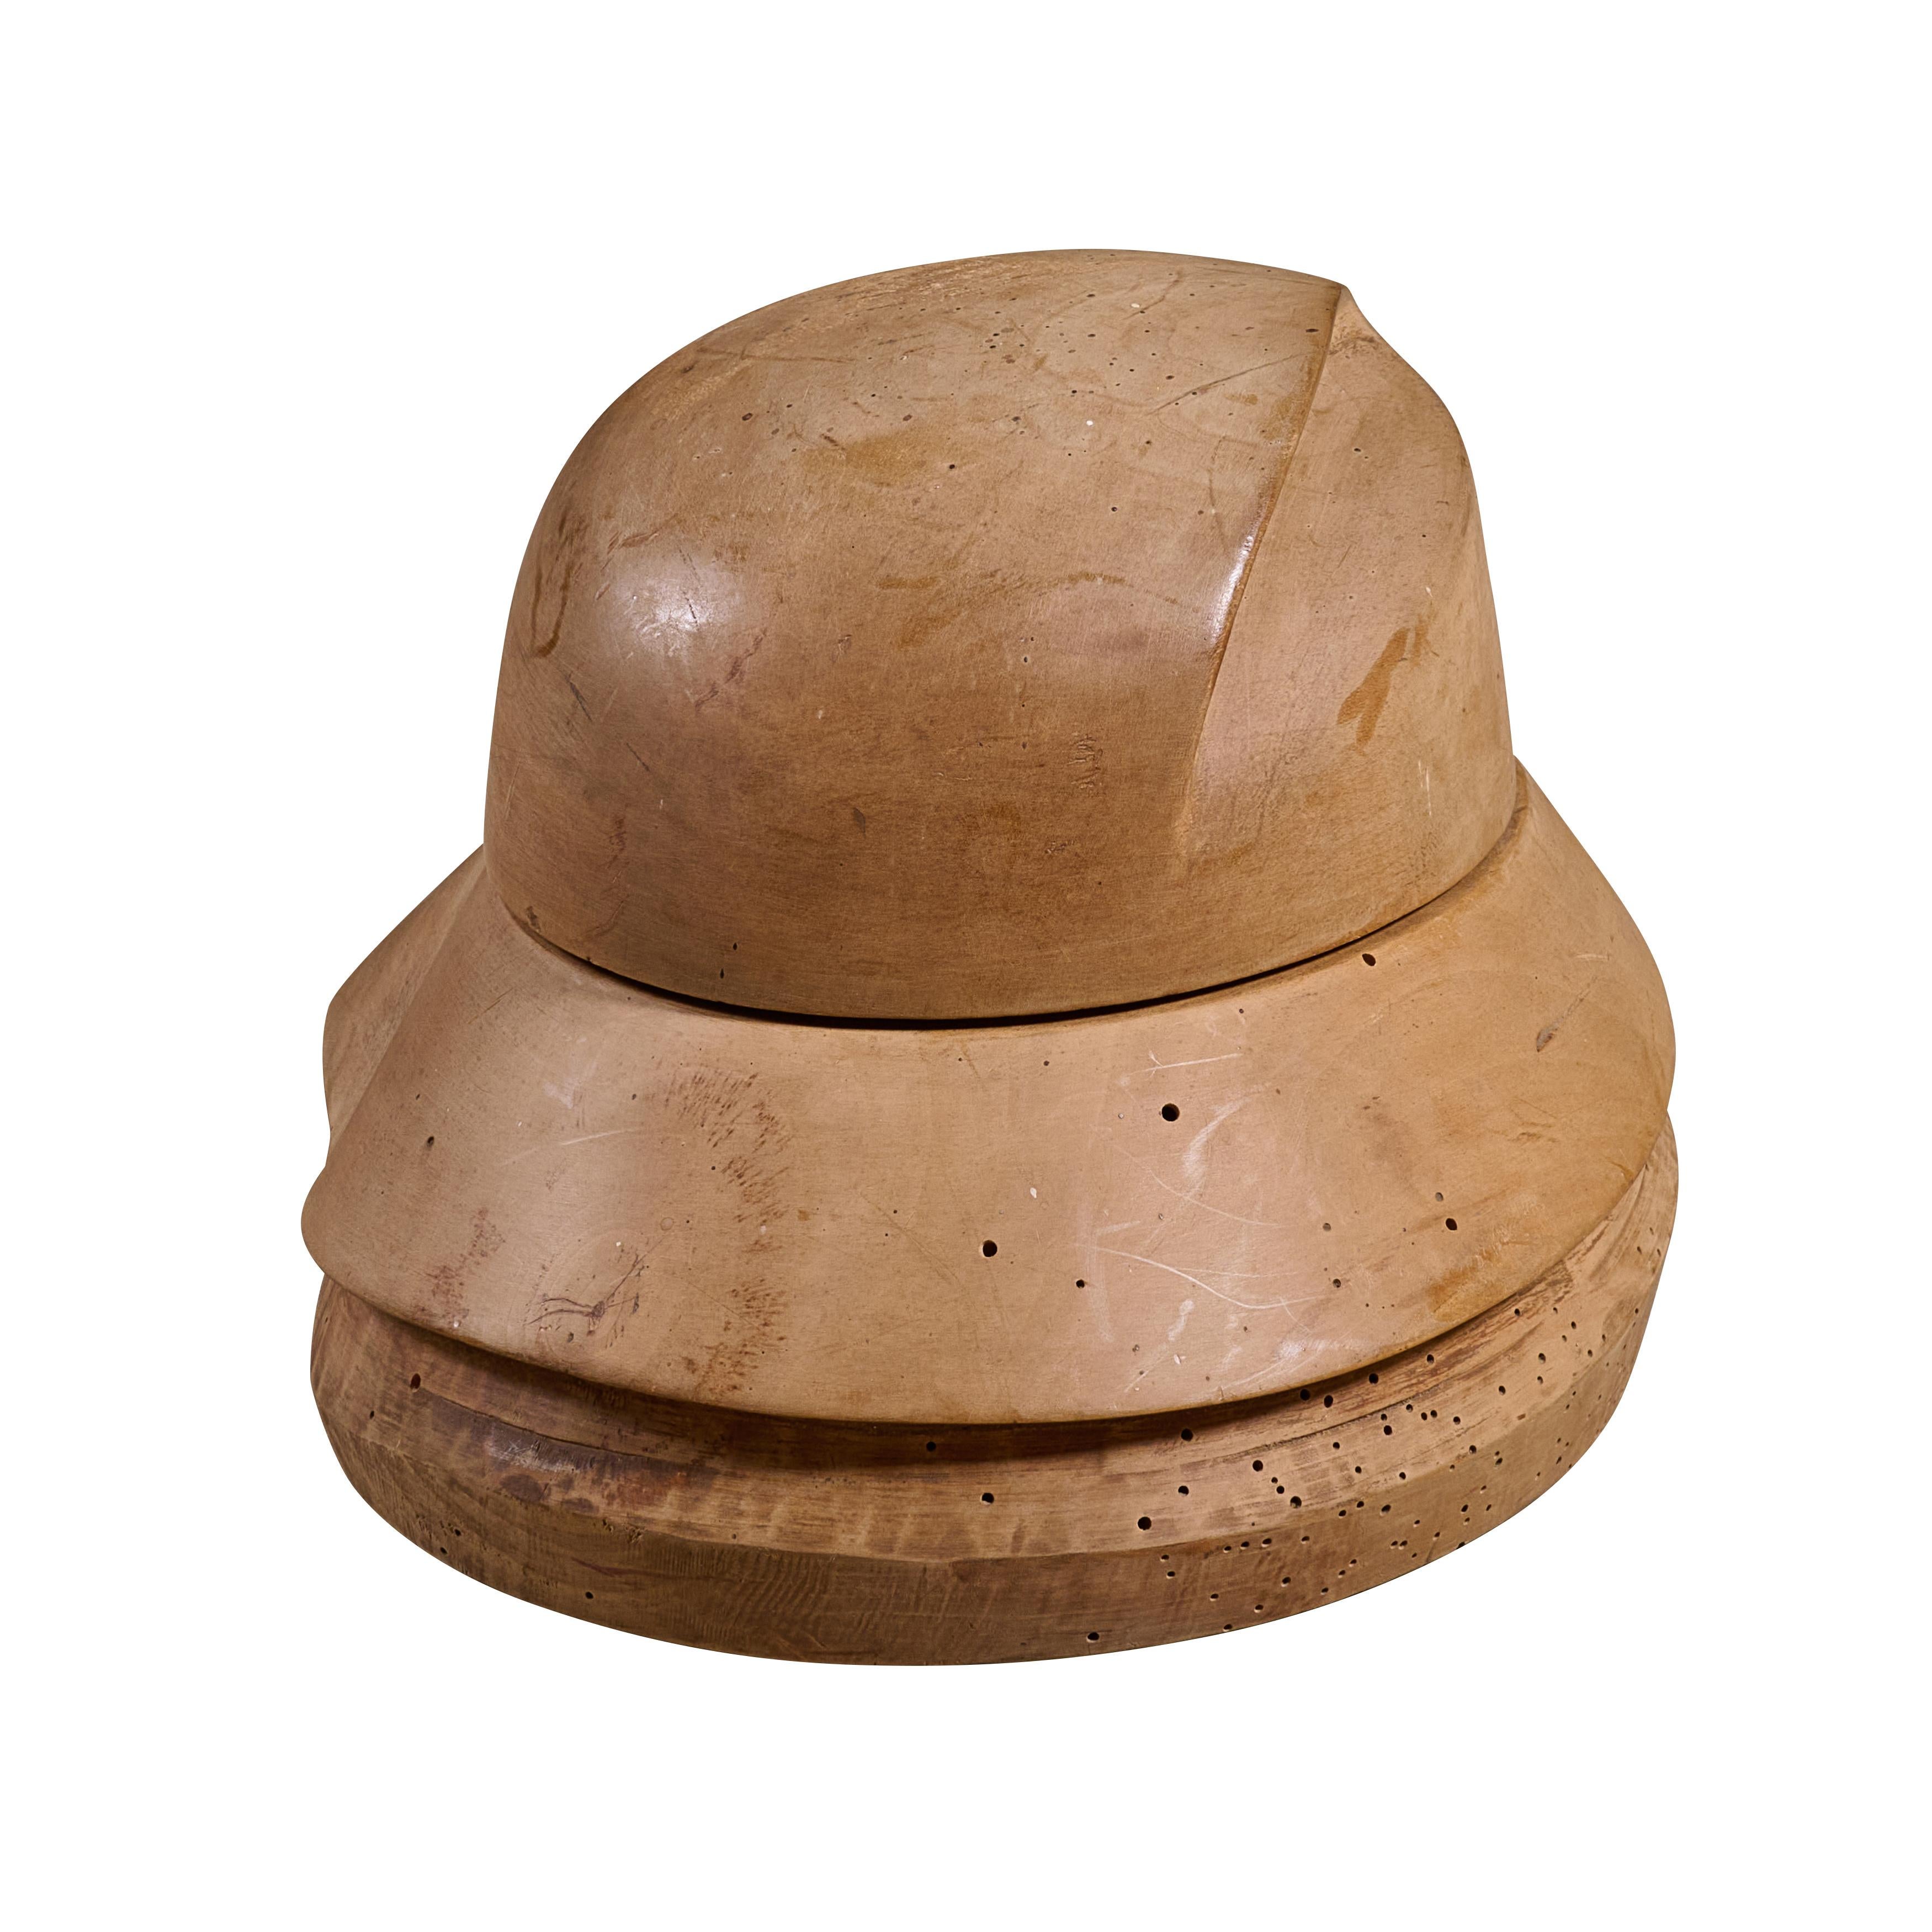 wooden hat mold